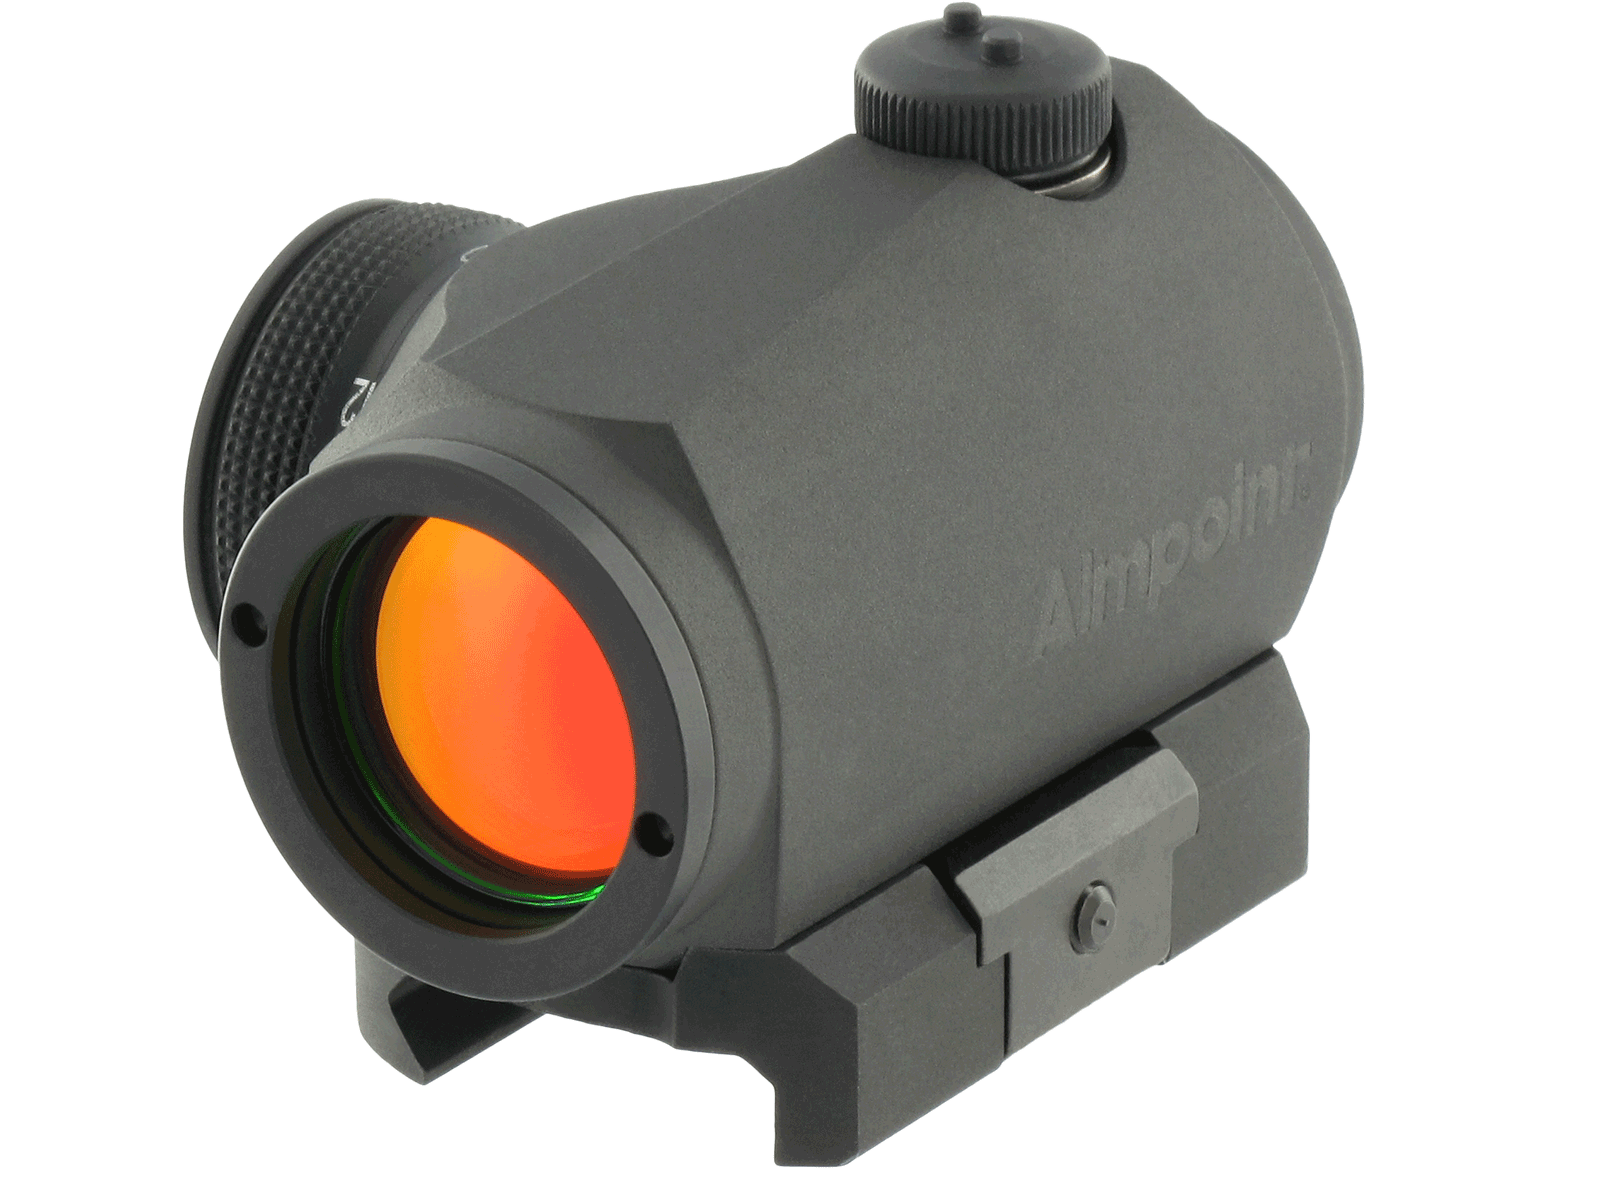 Aimpoint Micro T-1.png